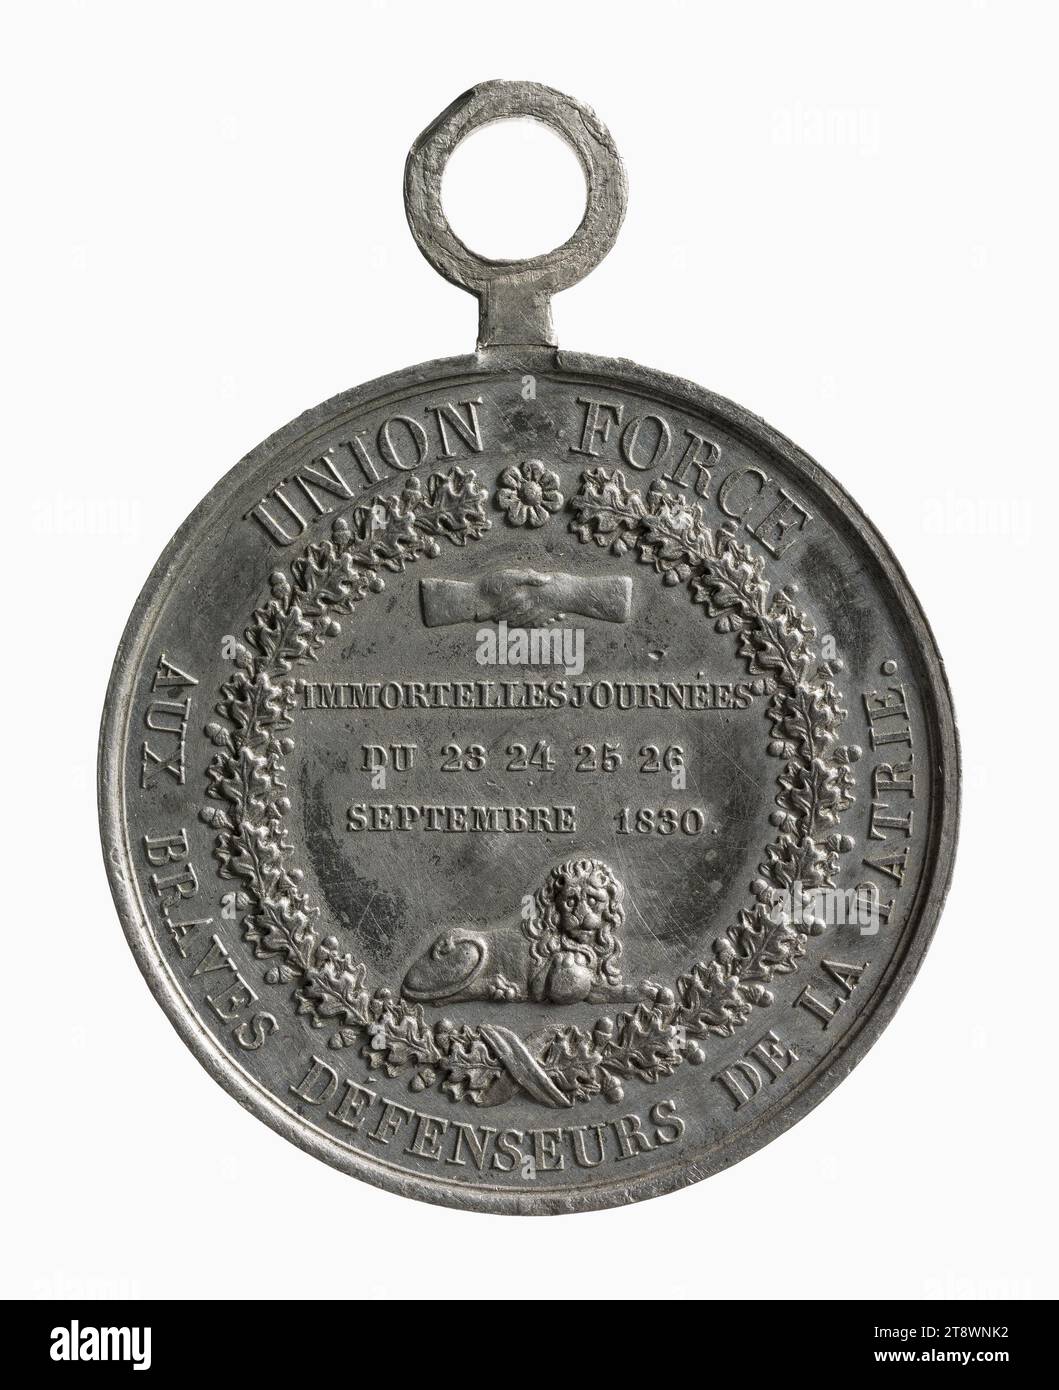 Independence of Belgium, 1830, Veyrat, Adrien Hippolyte, Engraver in medals, Array, Numismatic, Medal, Pewter, Diameter: 3.2 cm, Weight (type dimension): 13.57 g Stock Photo